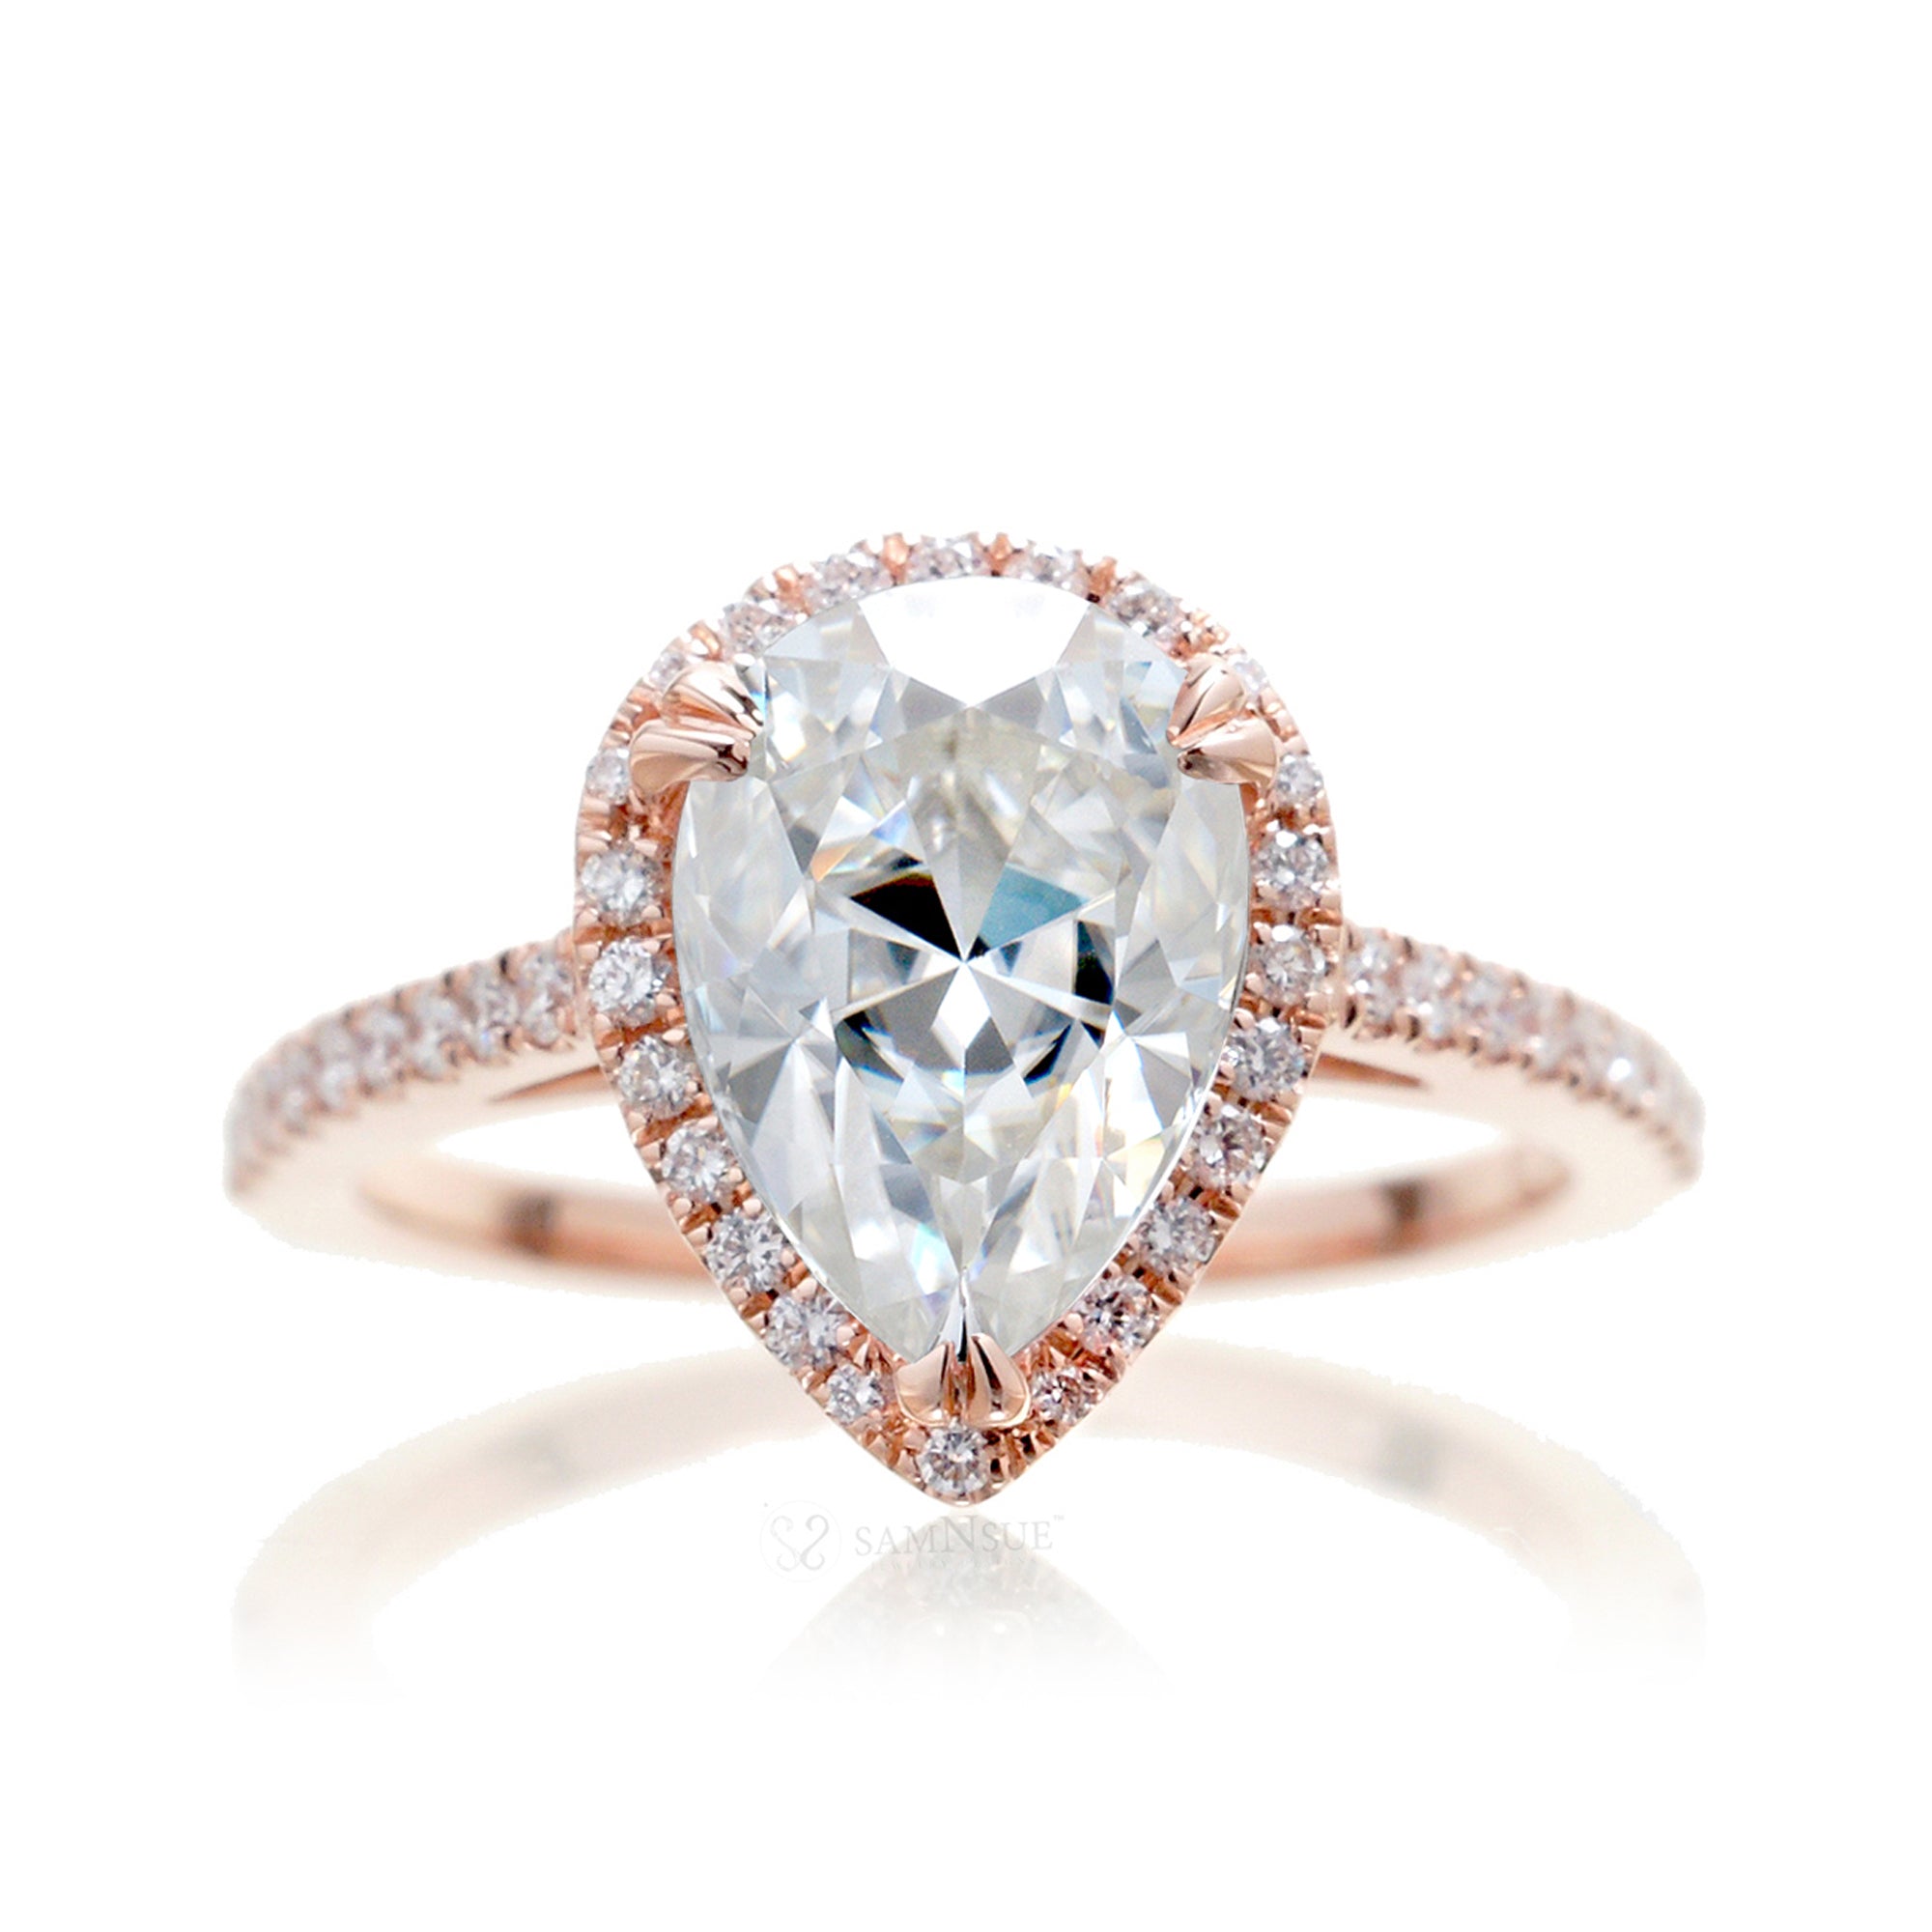 Pear moissanite and diamond halo ring in the signature rose gold